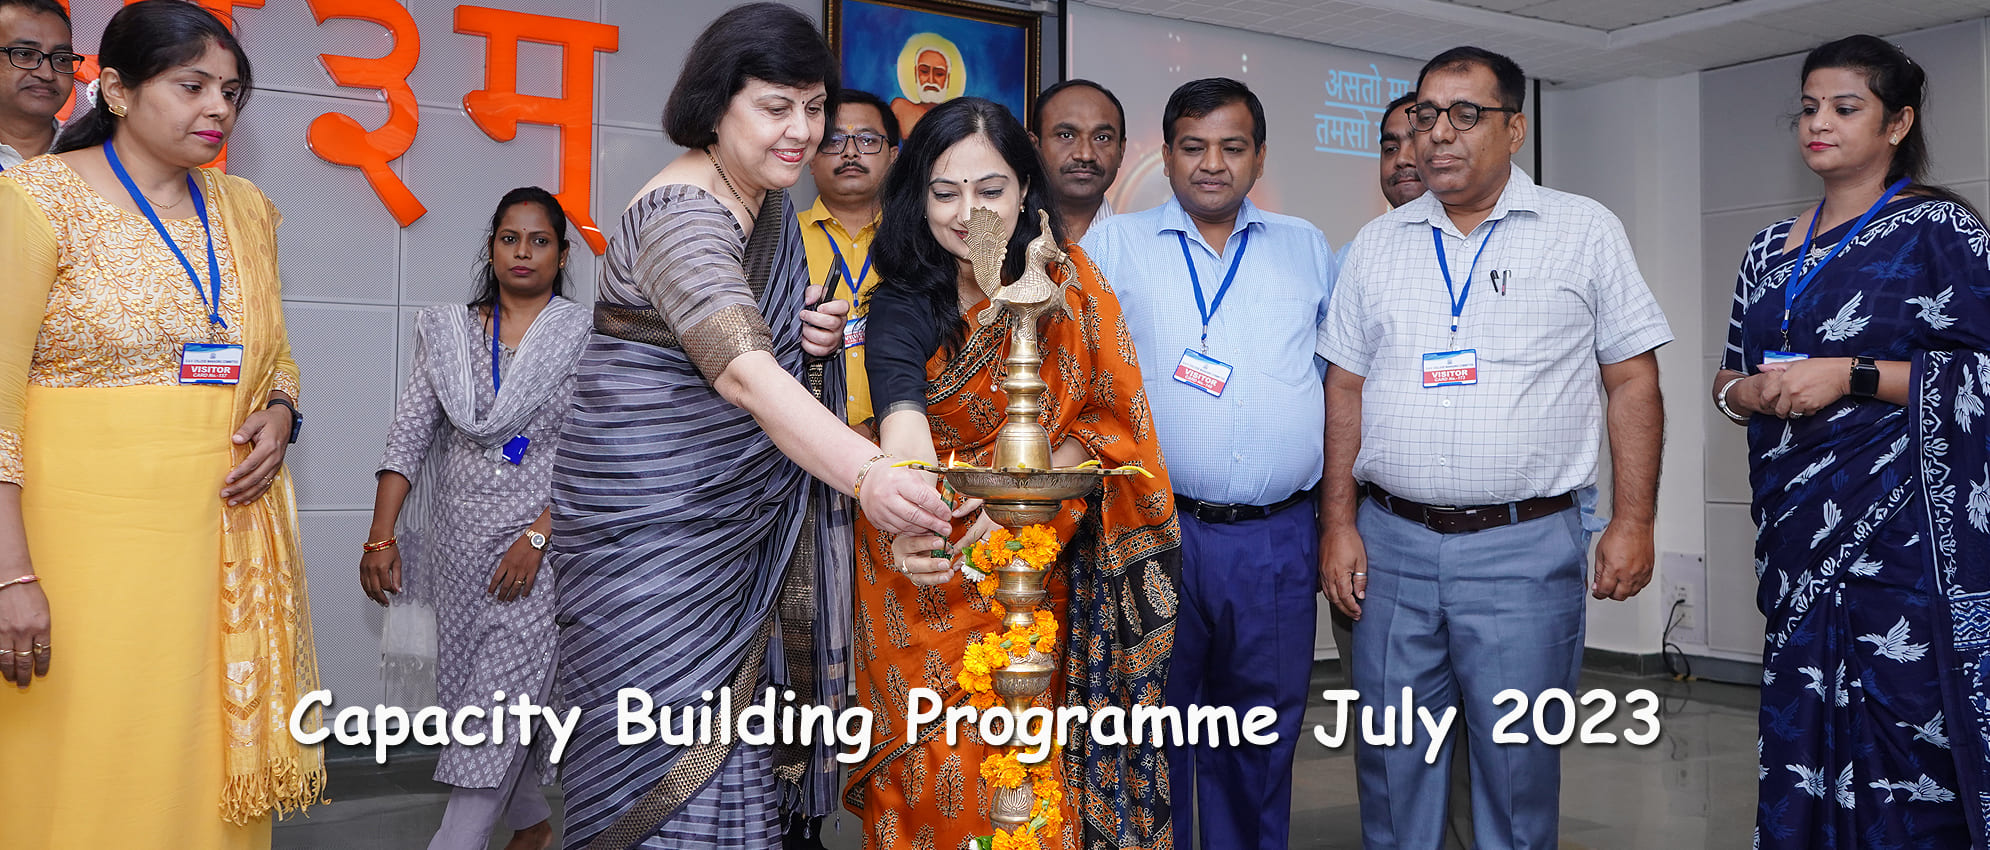 Capacity Building Programme July 2023